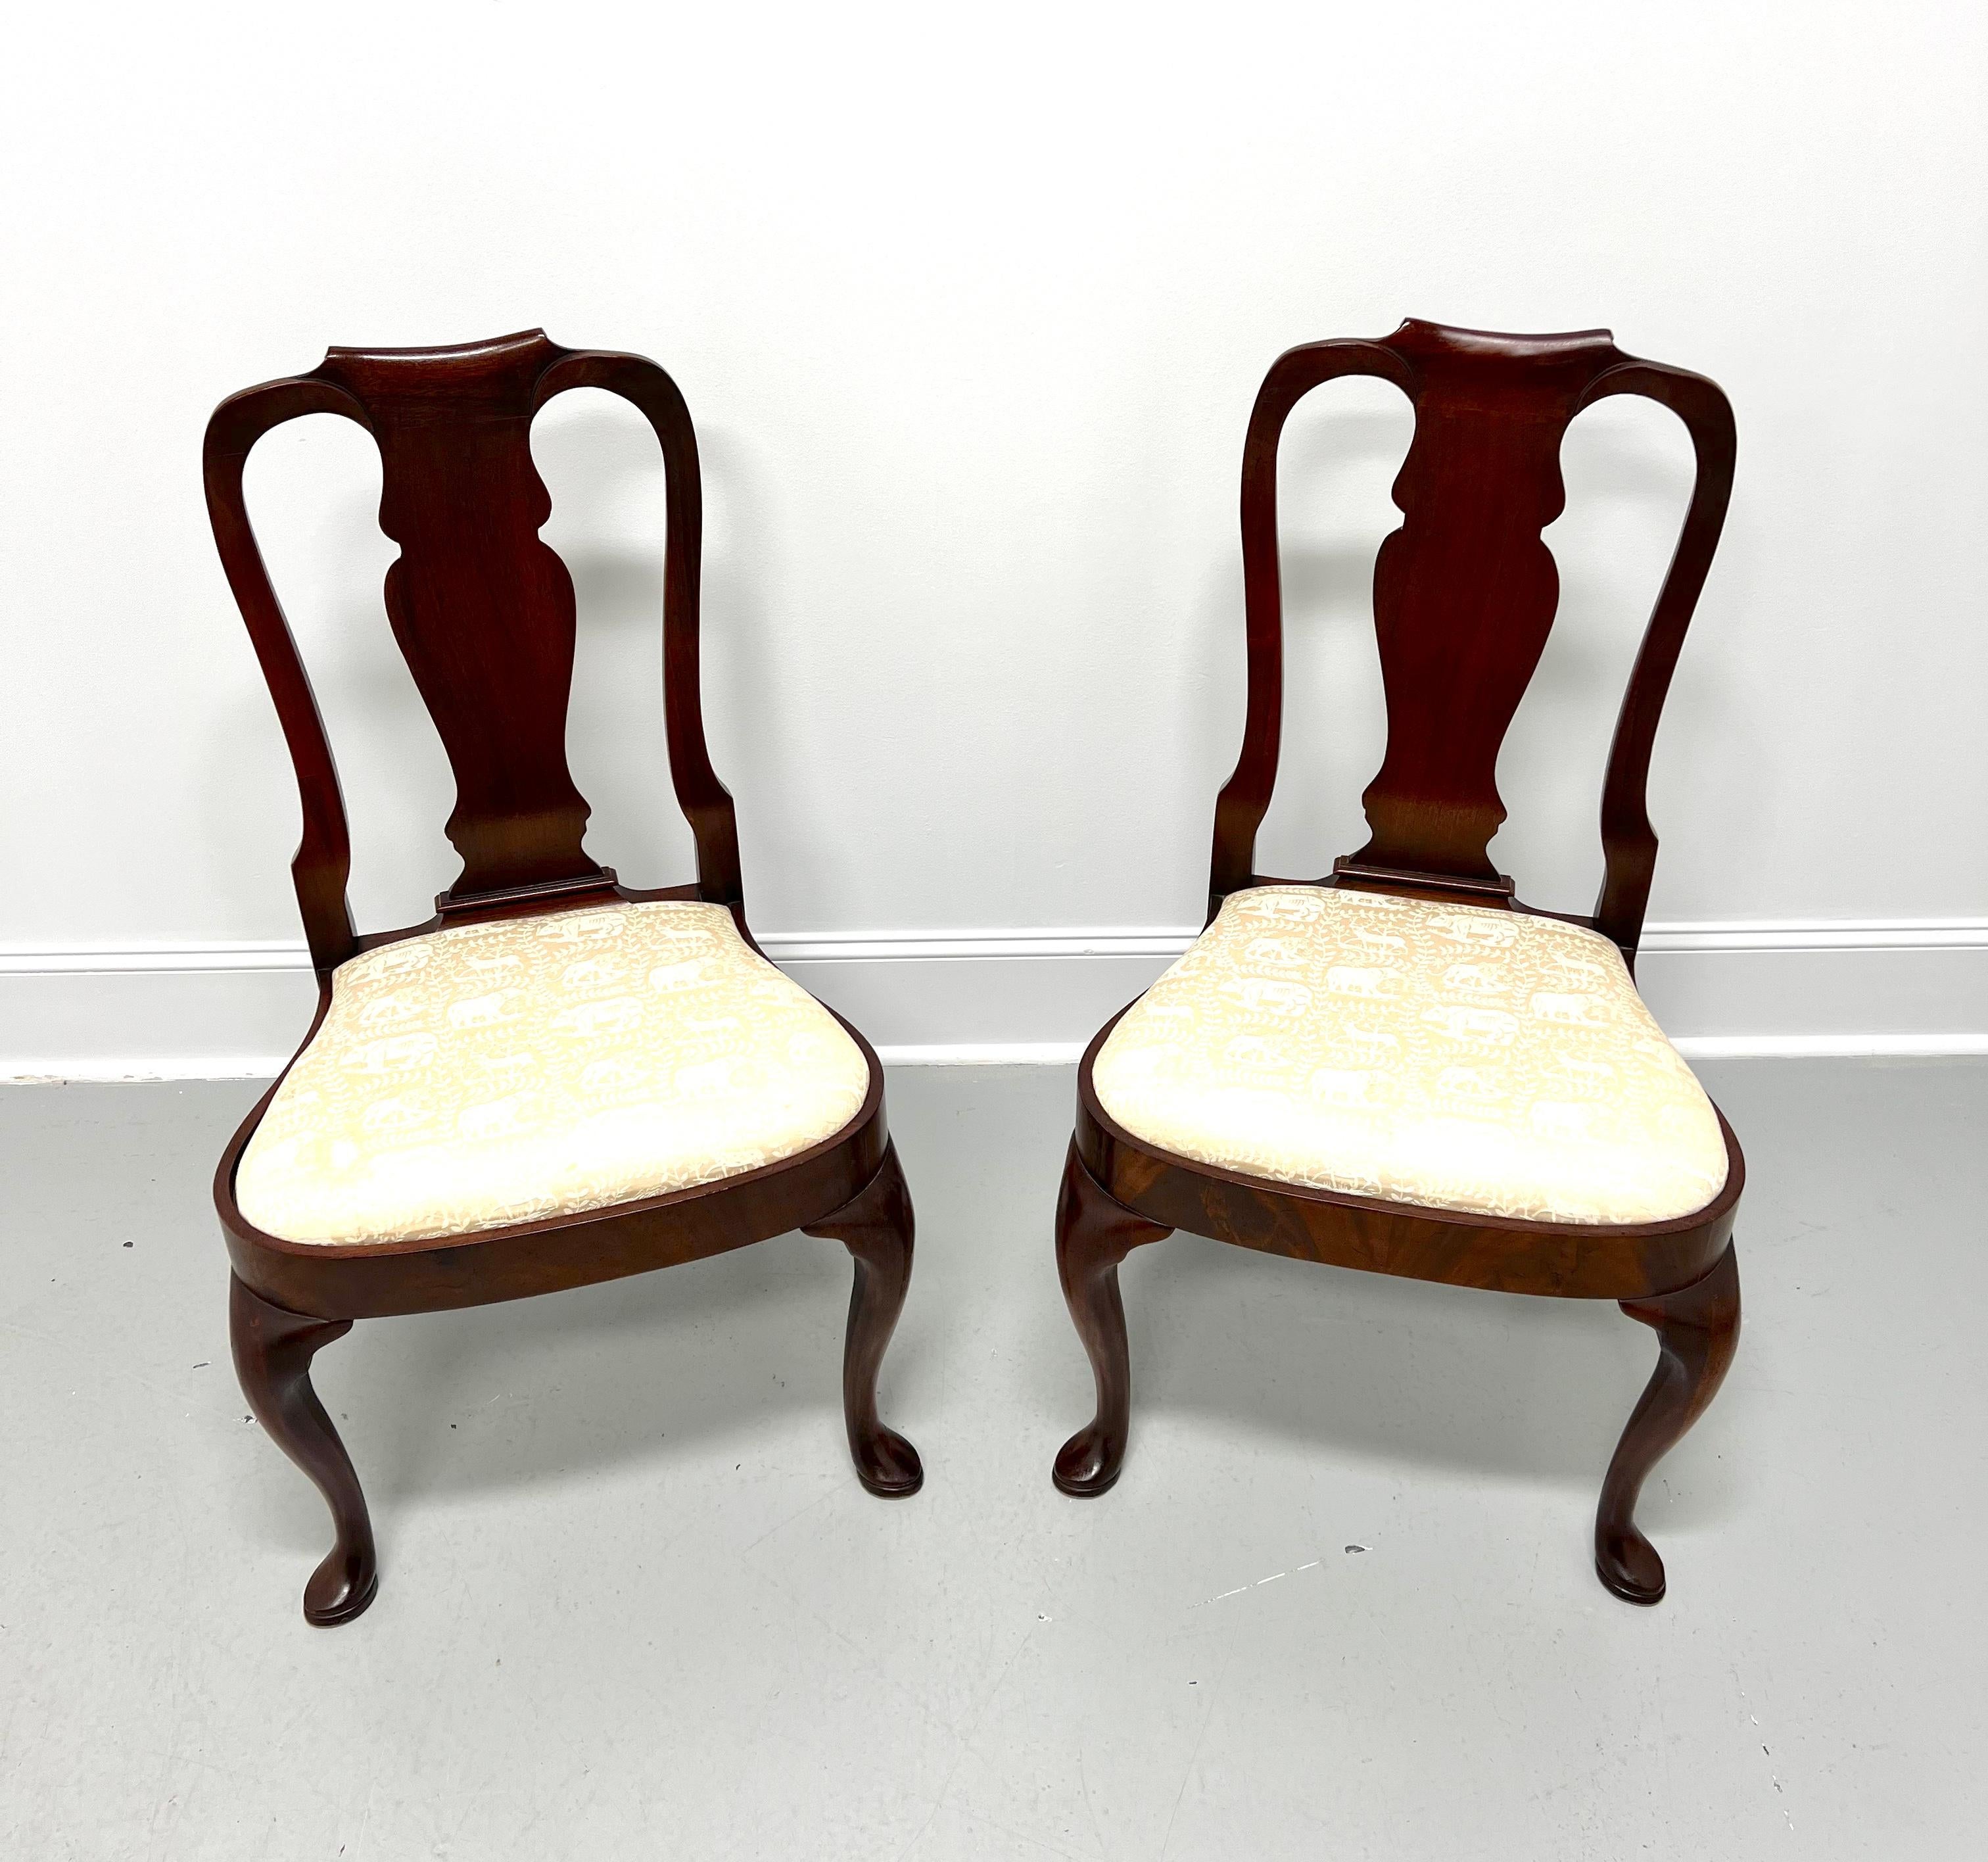 A pair of Queen Anne style dining side chairs by Hickory Chair. Mahogany with carved backrest, a cream color brocade fabric upholstered seat, rounded apron, cabriole front legs, and pad feet. Made in North Carolina, USA, in the late 20th